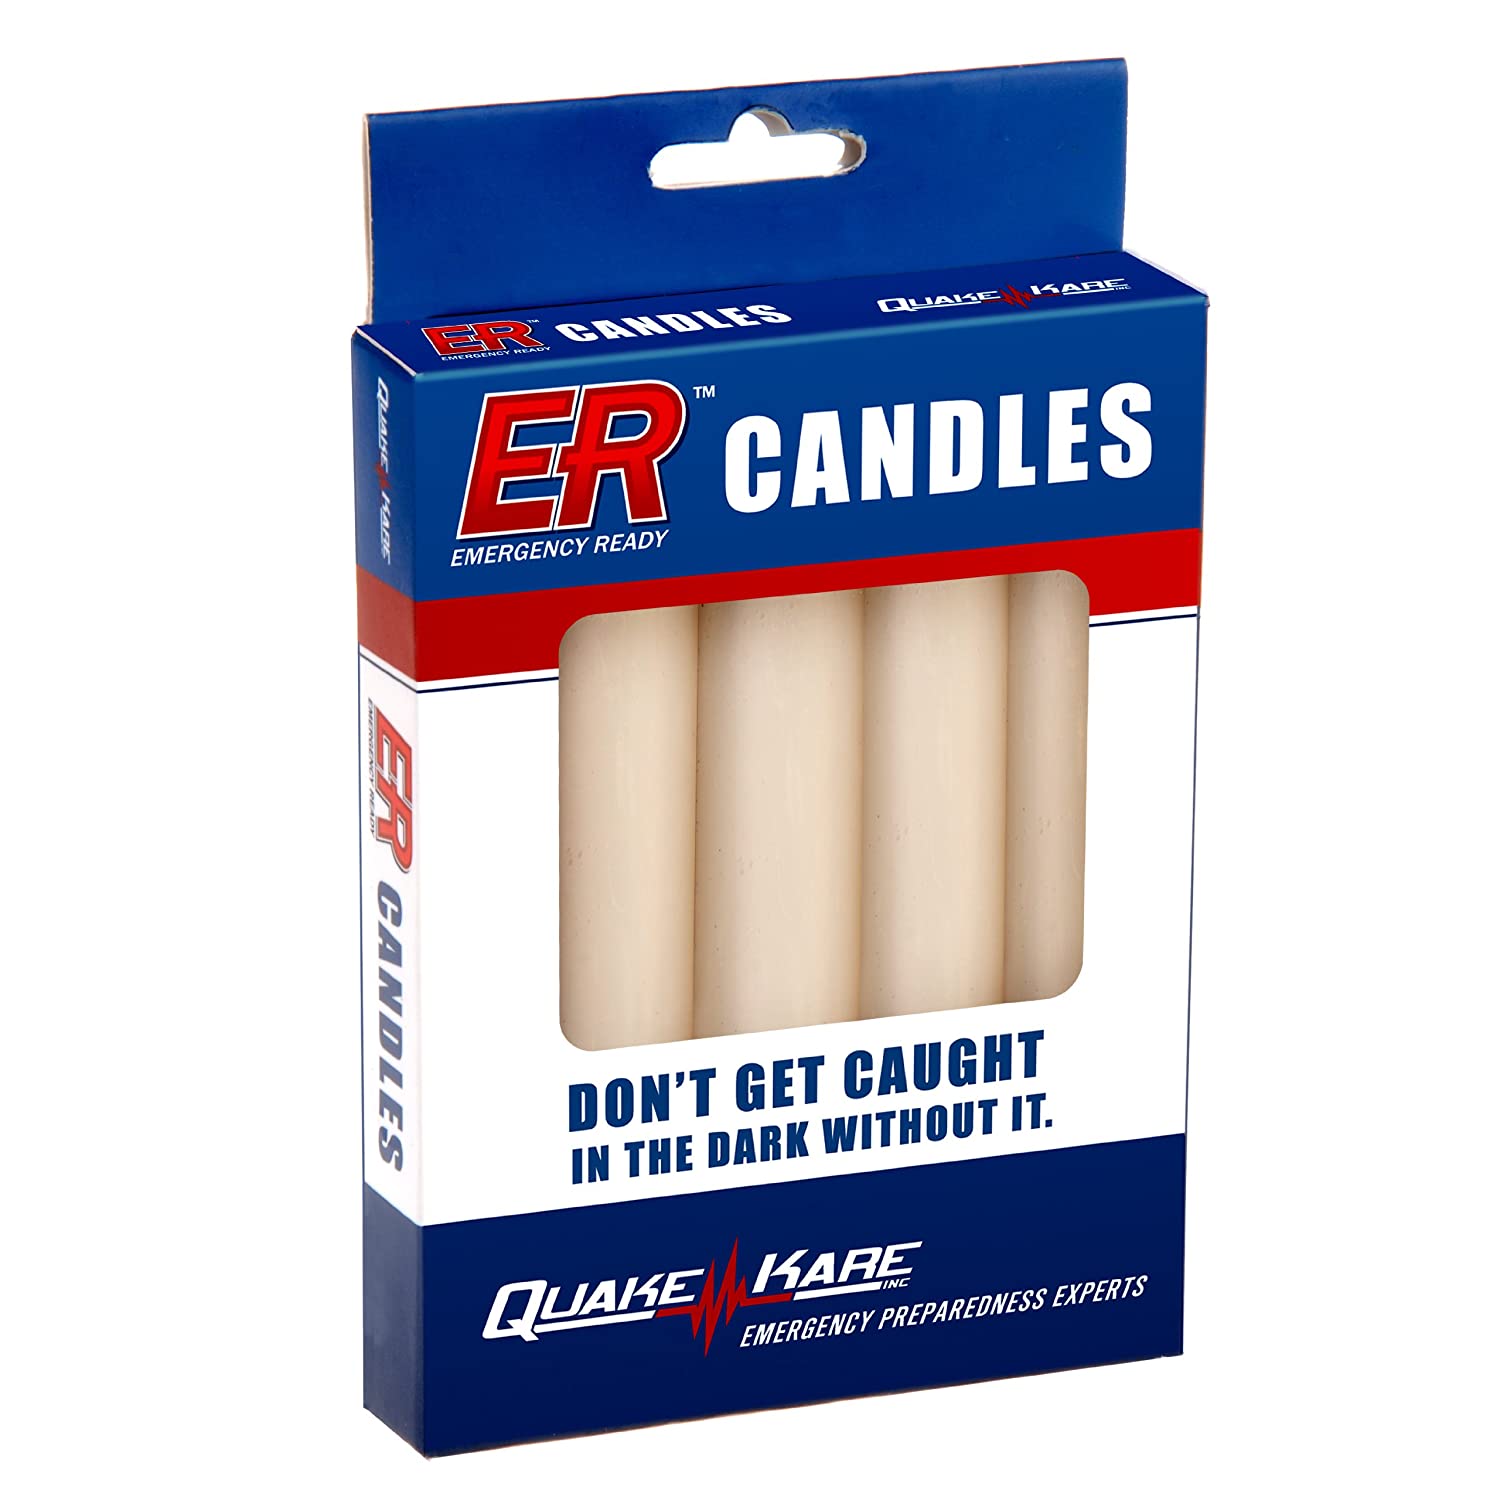 Best Emergency Candles 2021